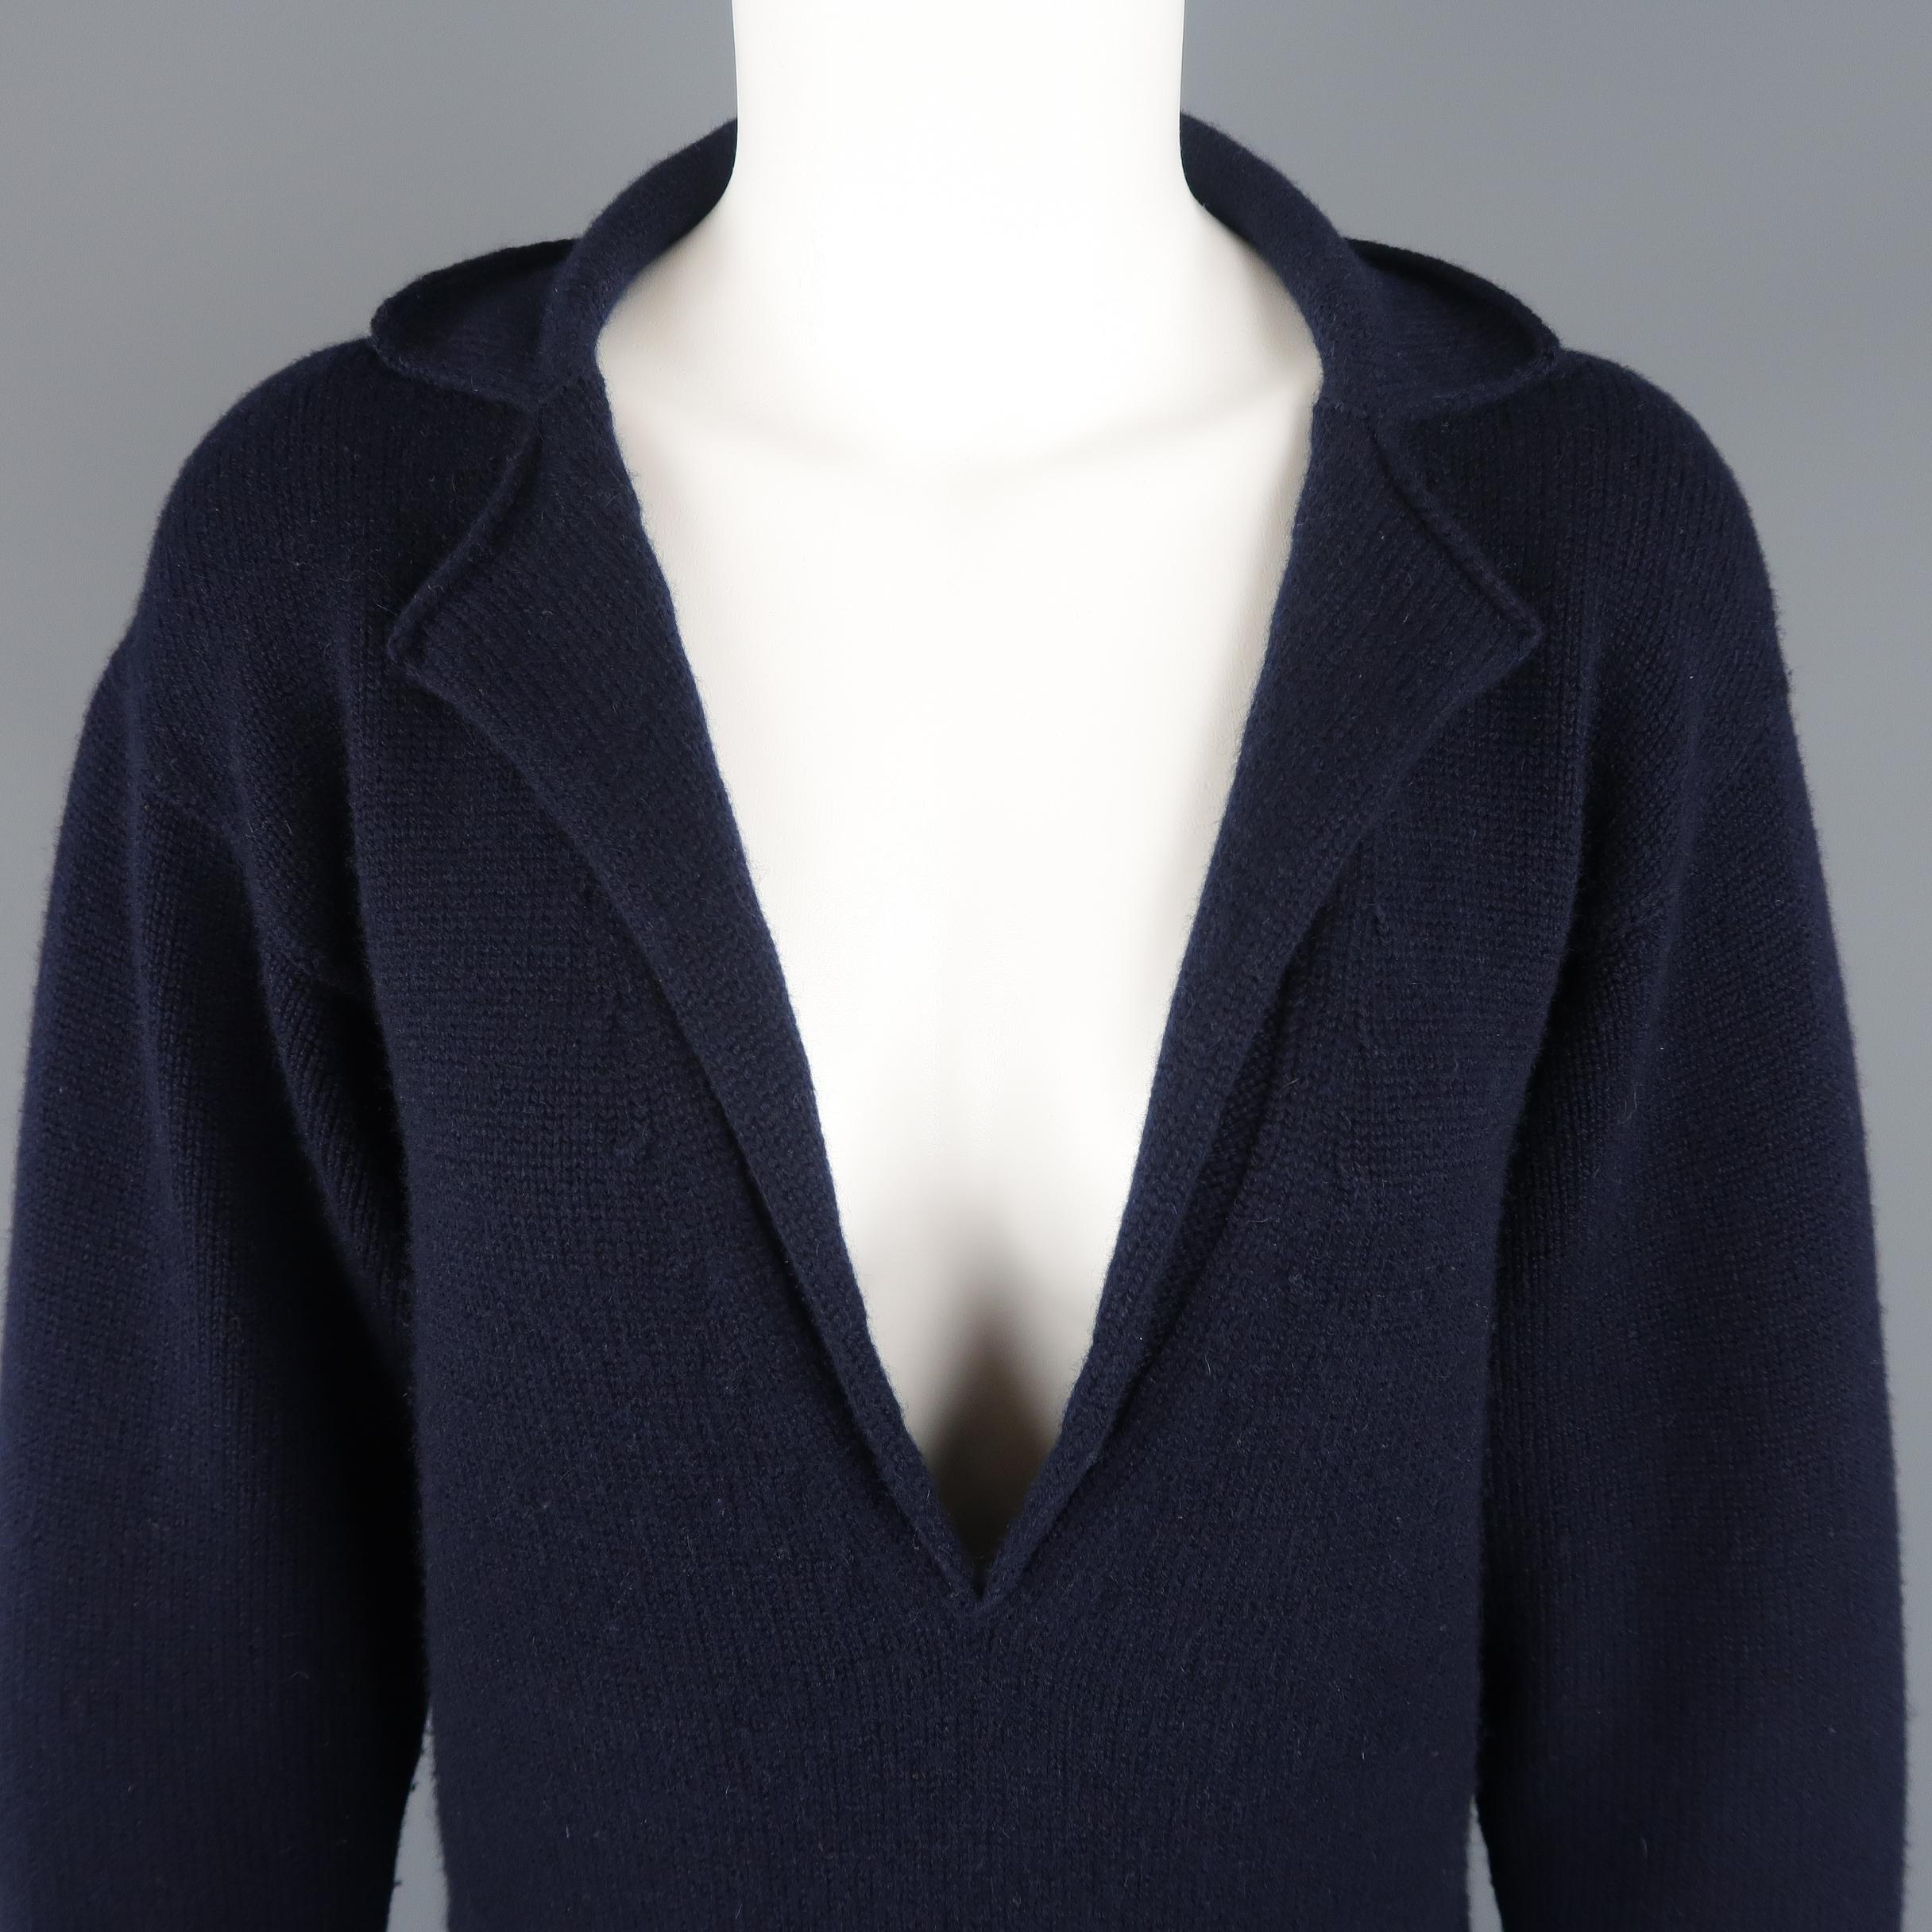 CHANEL mini sweater dress comes in navy blue cashmere knit with a deep V neck, notch lapel, and patch pockets. Minor wear throughout. As-is. Made in Italy.
 
Good Pre-Owned Condition.
Marked: FR 36
 
Measurements:
 
Shoulder: 20 in.
Bust: 38